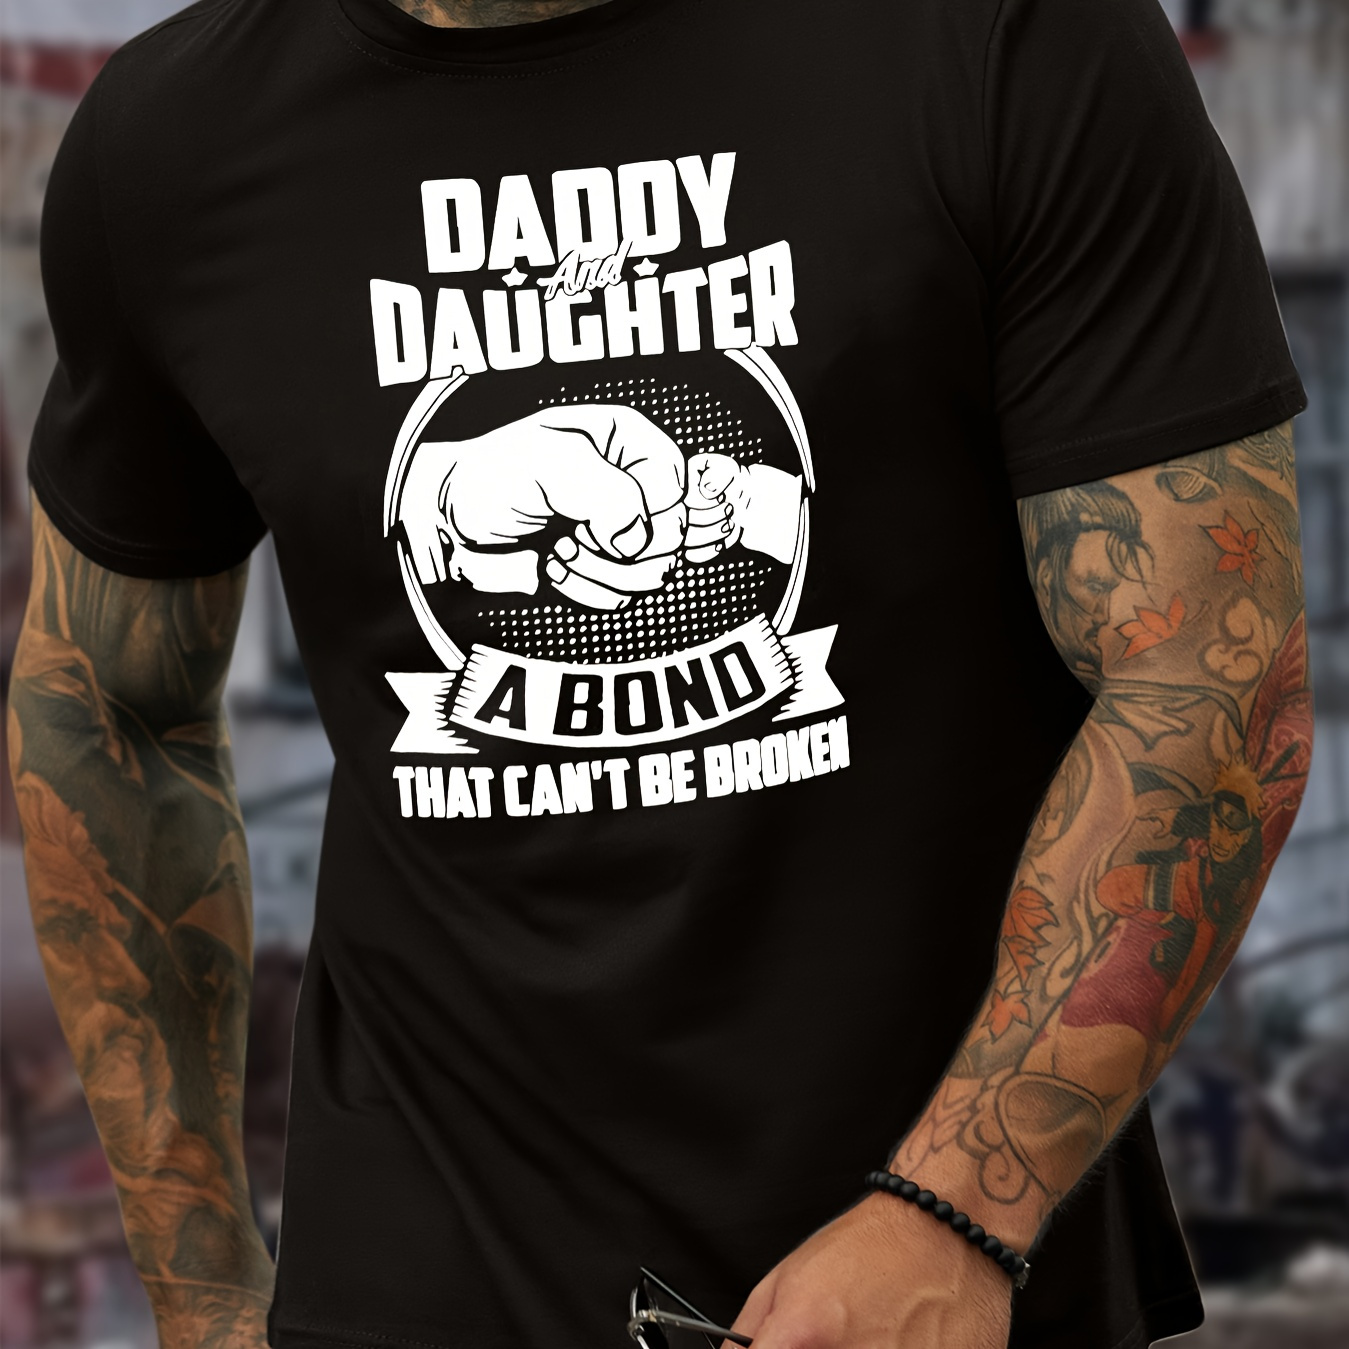 

Dad And Daughter Print Tee Shirt, Tees For Men, Casual Short Sleeve T-shirt For Summer